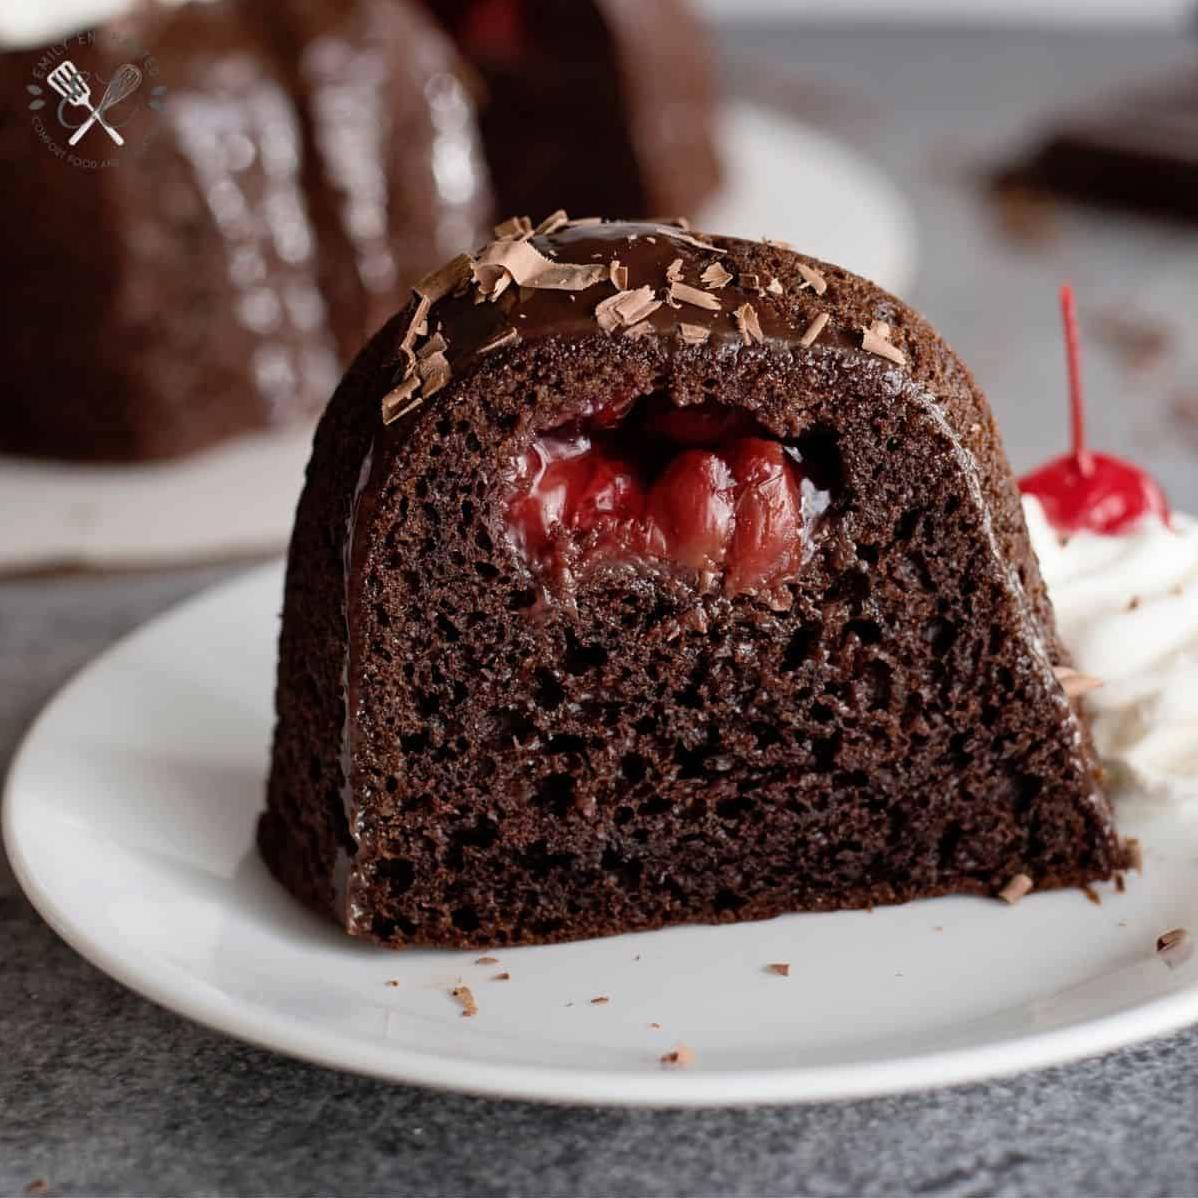  Satisfy your sweet tooth with this heavenly Black Forest Pound Cake.